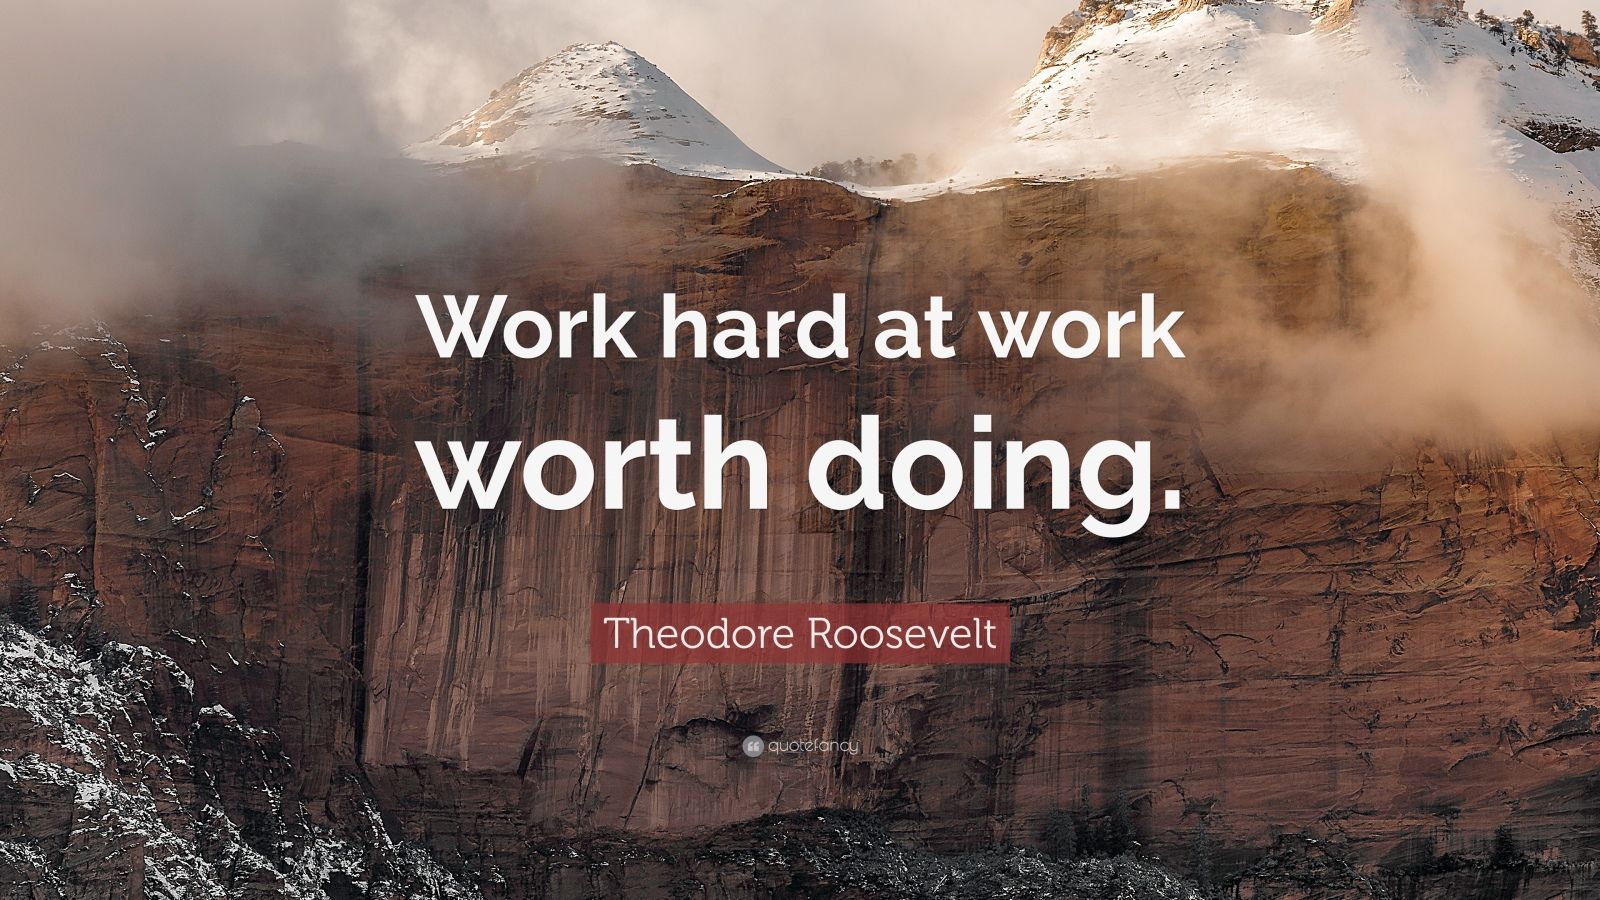 Theodore Roosevelt Quote: “Work hard at work worth doing.” (12